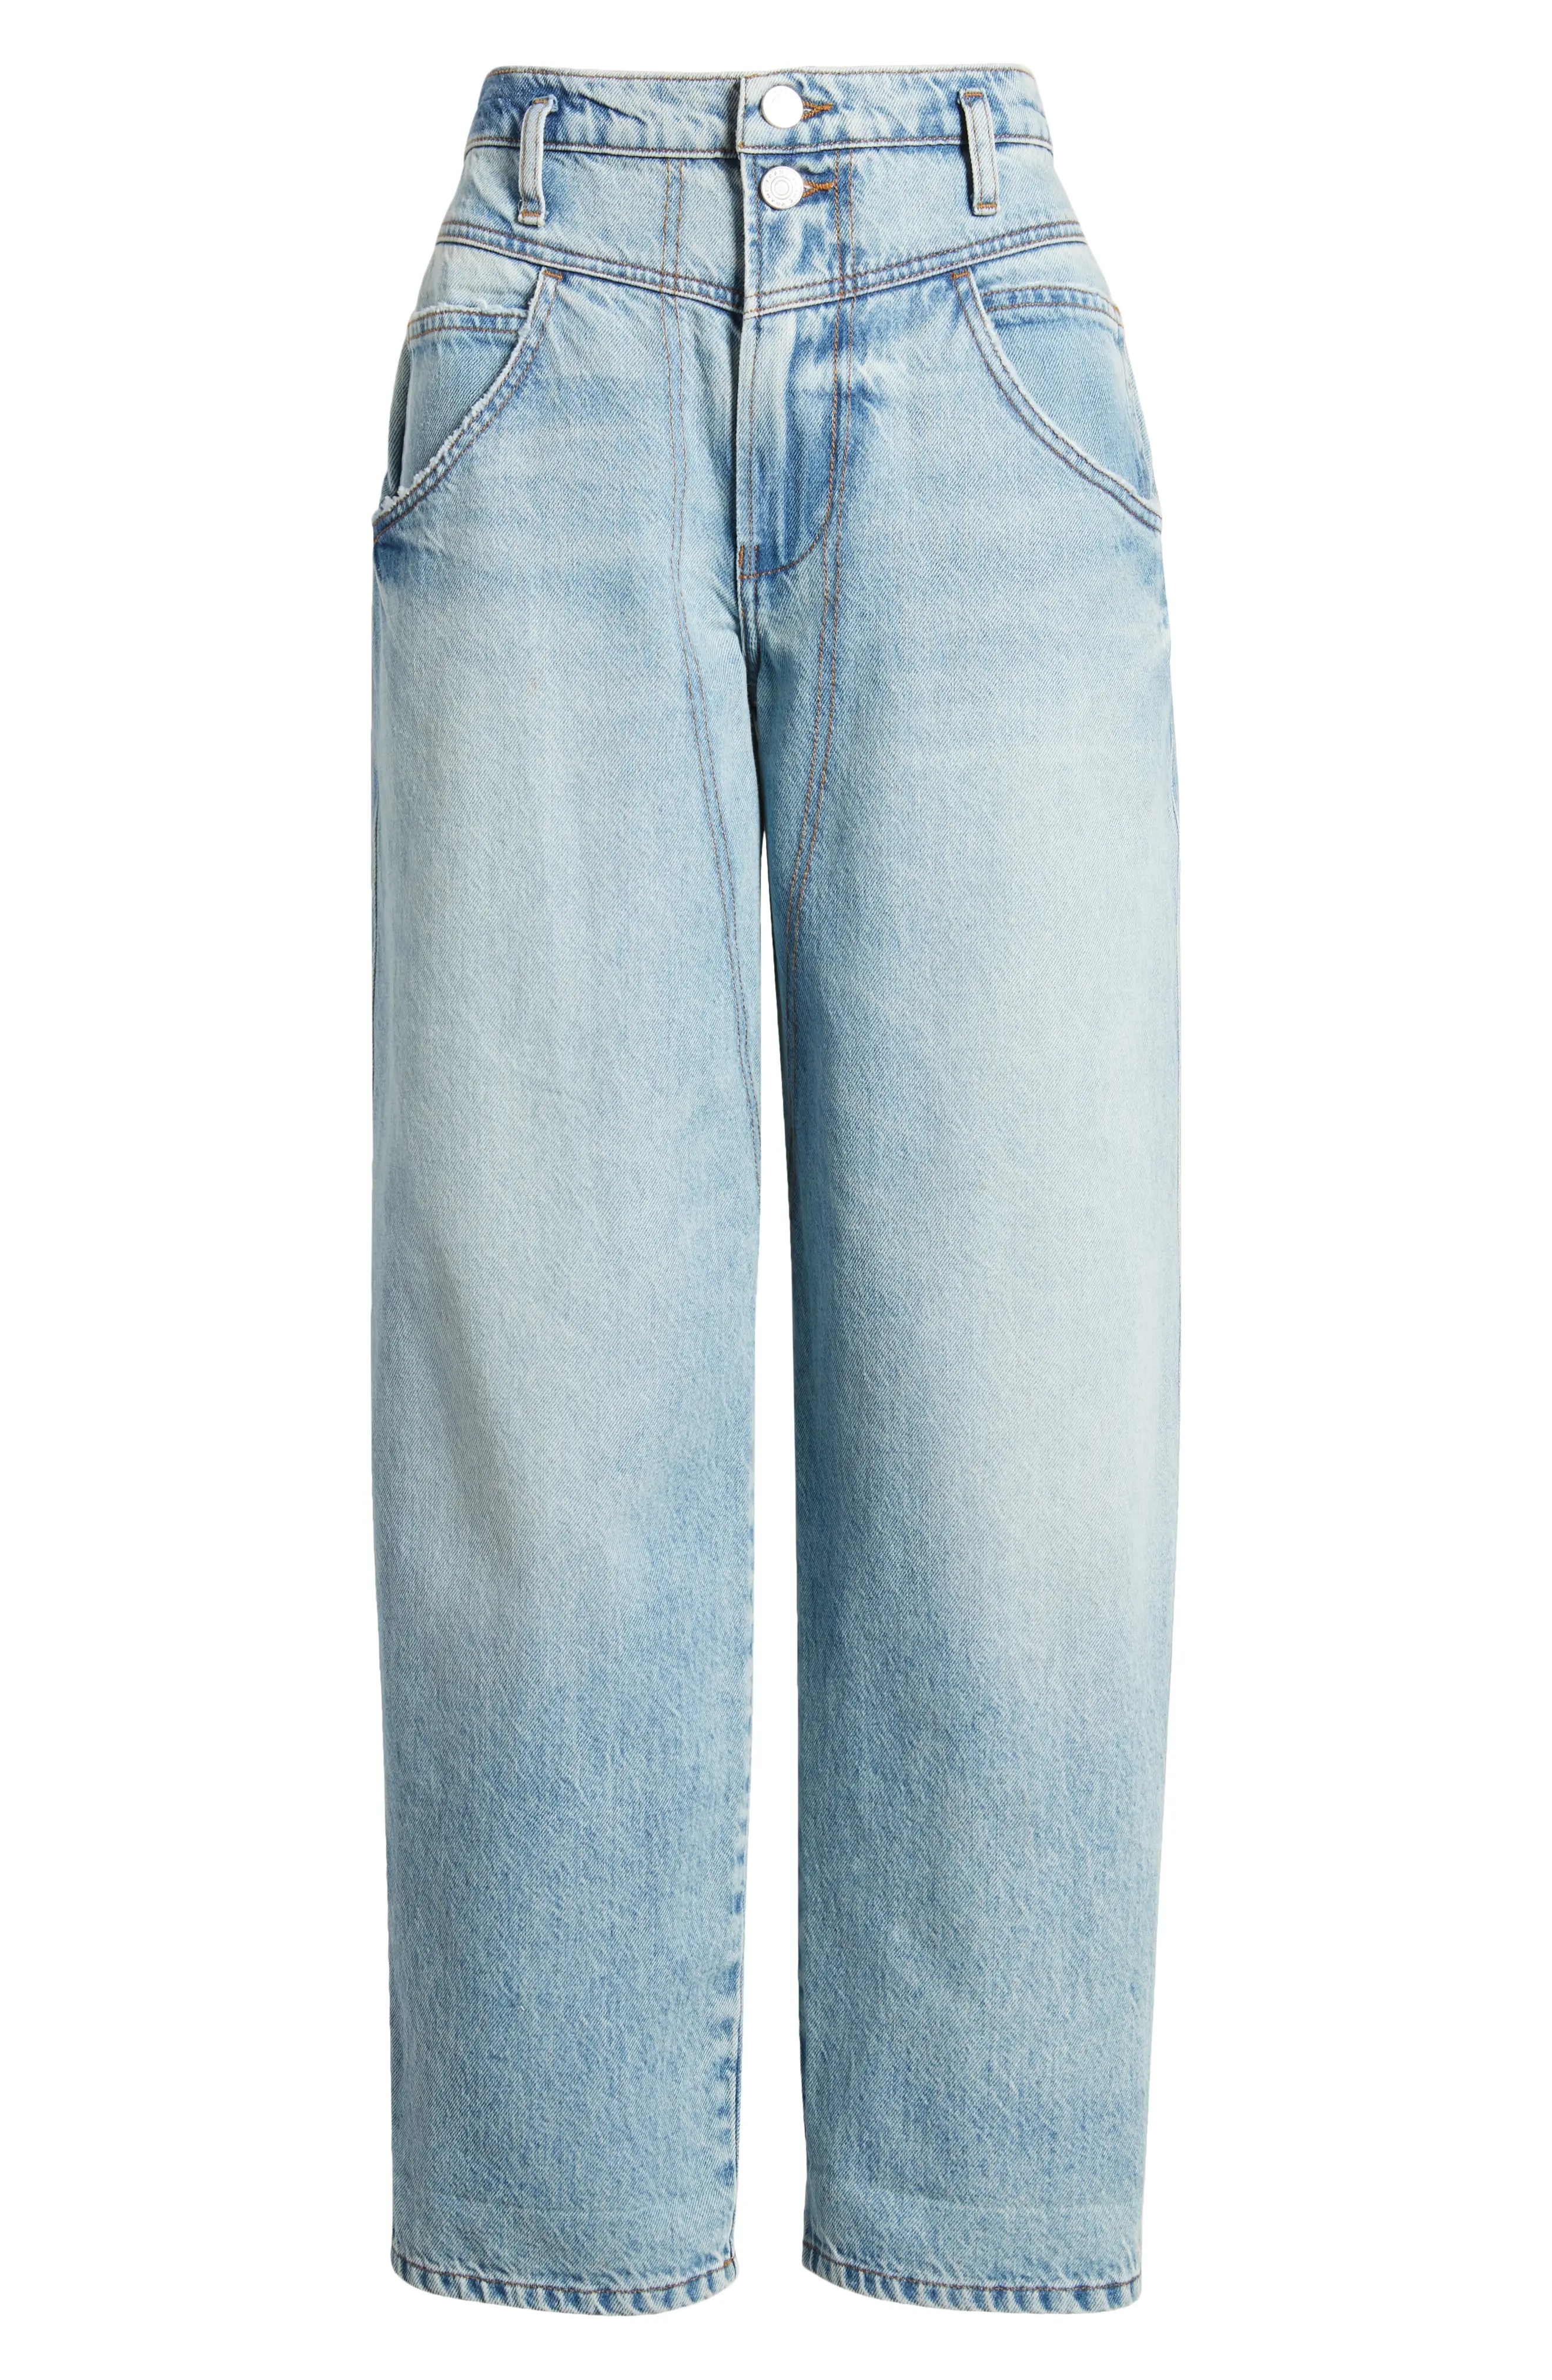 '90s Utility Loose Straight Leg Jeans - 5